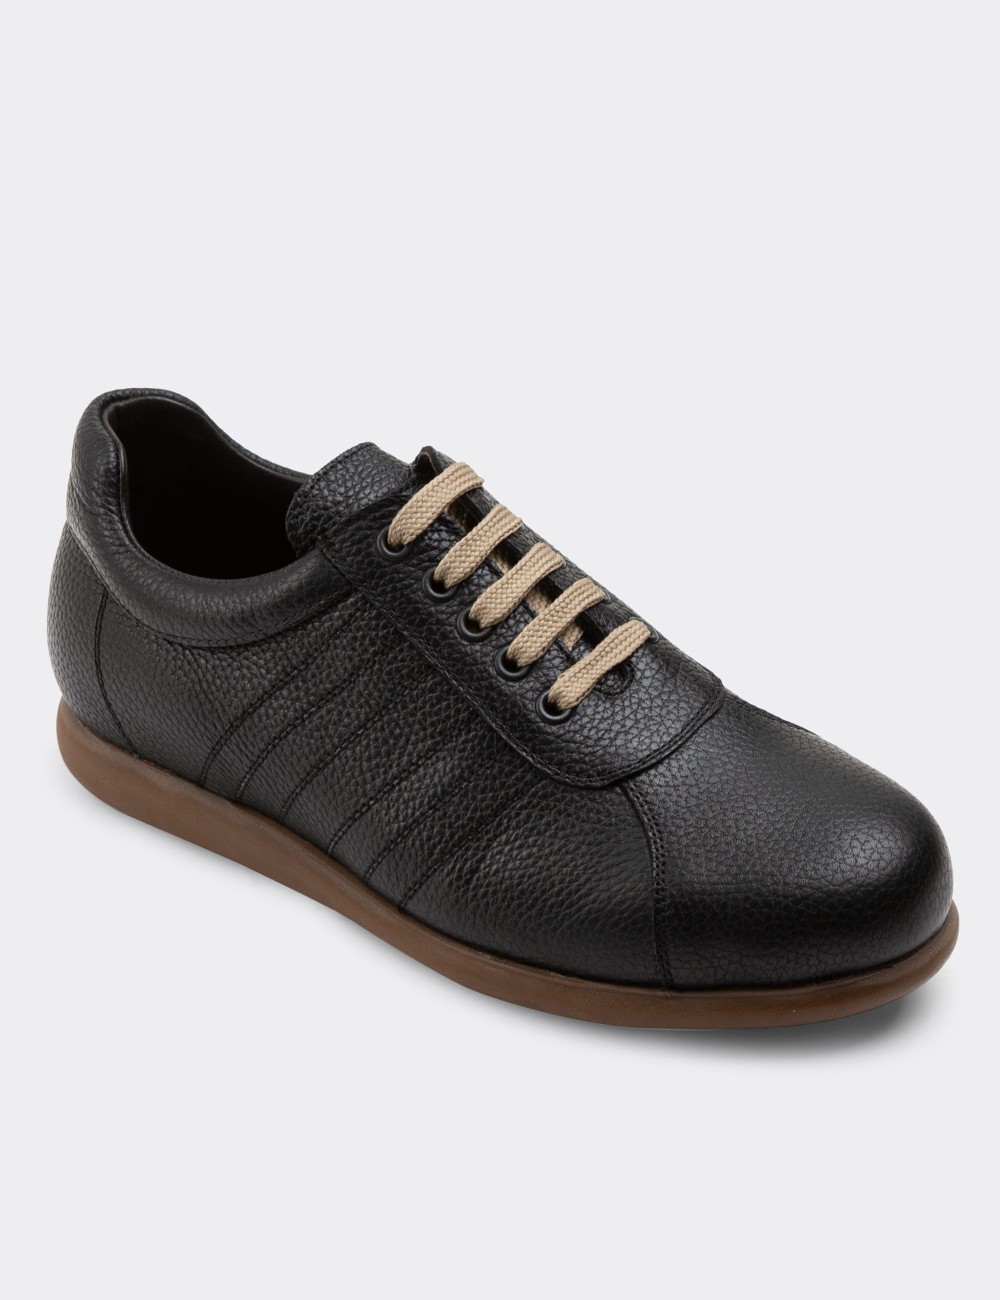 Black Leather Lace-up Shoes - 01826MSYHC05